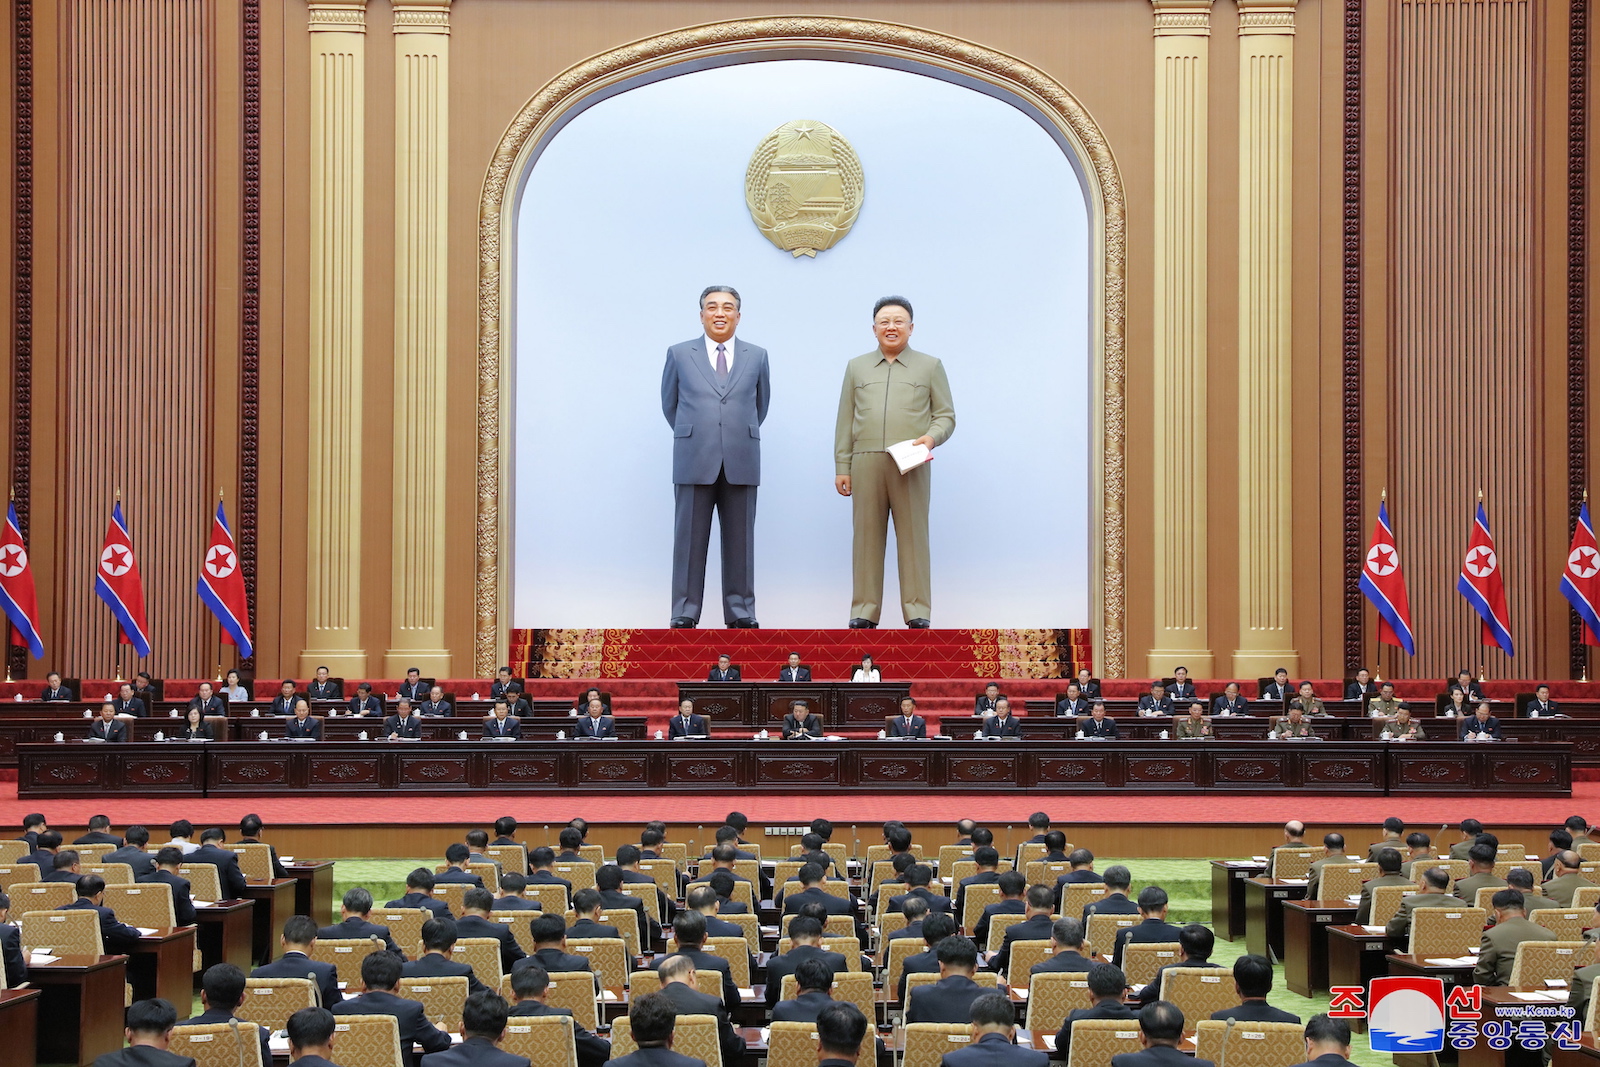 epa10887071 A photo released by the official North Korean Central News Agency (KCNA) on 28 September 2023 shows North Korean leader Kim Jong Un (C) attending the 9th Session of the 14th Supreme People's Assembly (SPA) at the Mansudae Assembly Hall in Pyongyang, North Korea, during the two-day event on 26-27 September 2023. North Korea's legislature has enshrined its status as a nuclear power in its constitution with the unanimous adoption of a 'crucial agenda item for formulating the DPRK's policy on nuclear force as the basic law of the state', according to KCNA.  EPA/KCNA   EDITORIAL USE ONLY